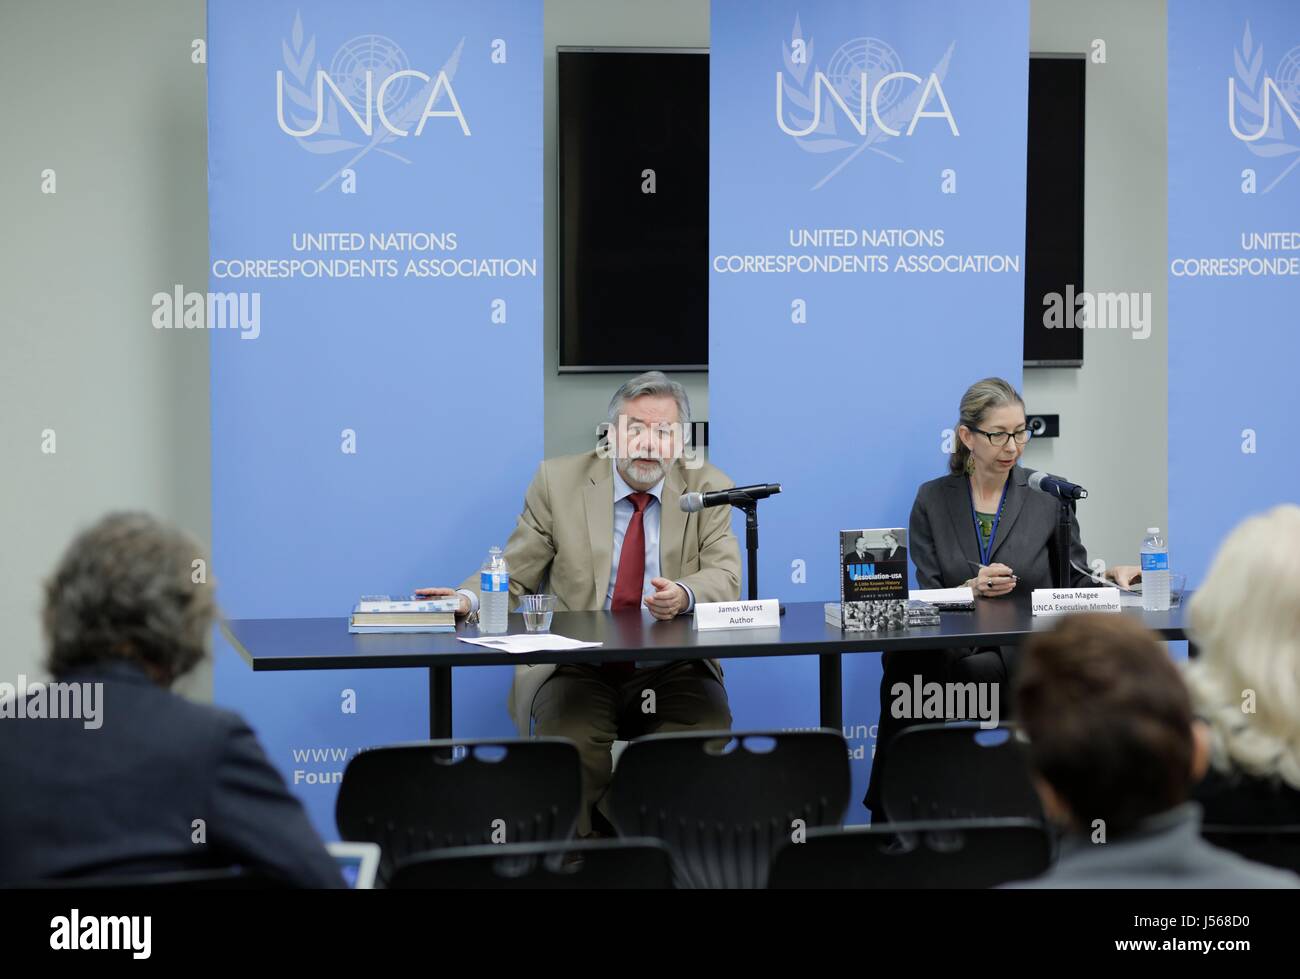 United Nations, New York, USA. 16th May, 2017. Book introduction by James Wurst 'The UN Association-USA: A Little Known History of Advocacy and Action' today at the UN Headquarters in New York. Credit: dpa picture alliance/Alamy Live News Stock Photo